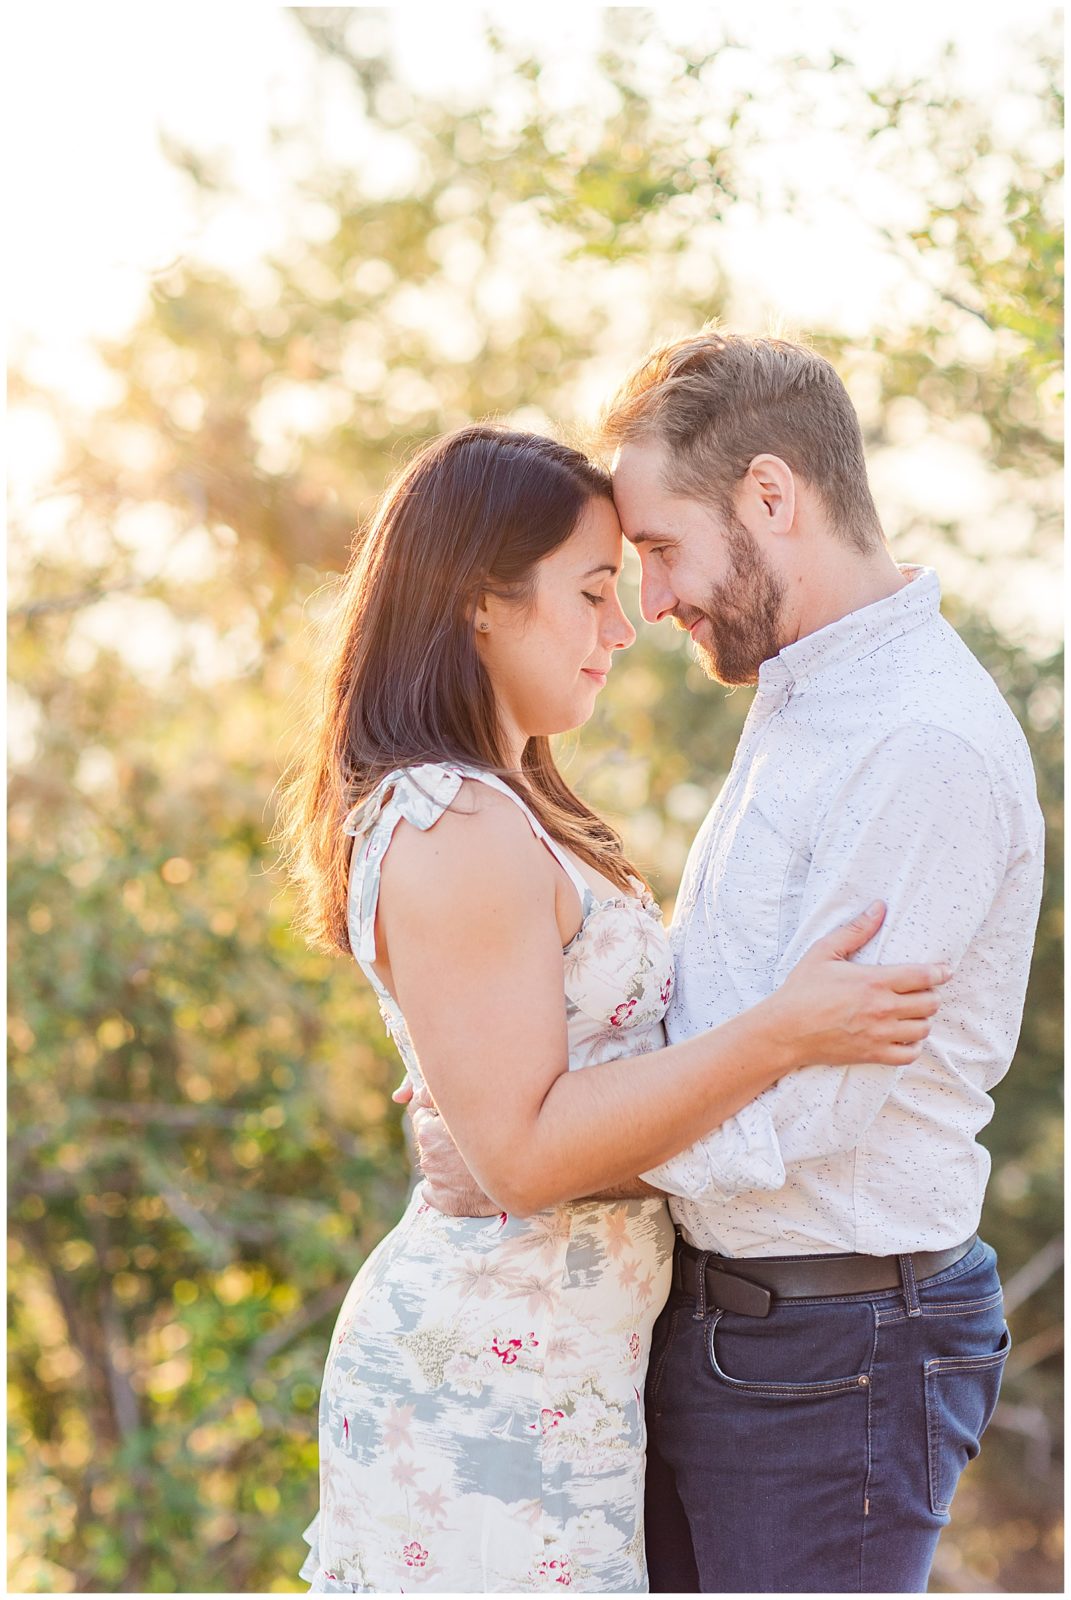 Golden light on loving faces at this New Mexico photography session.